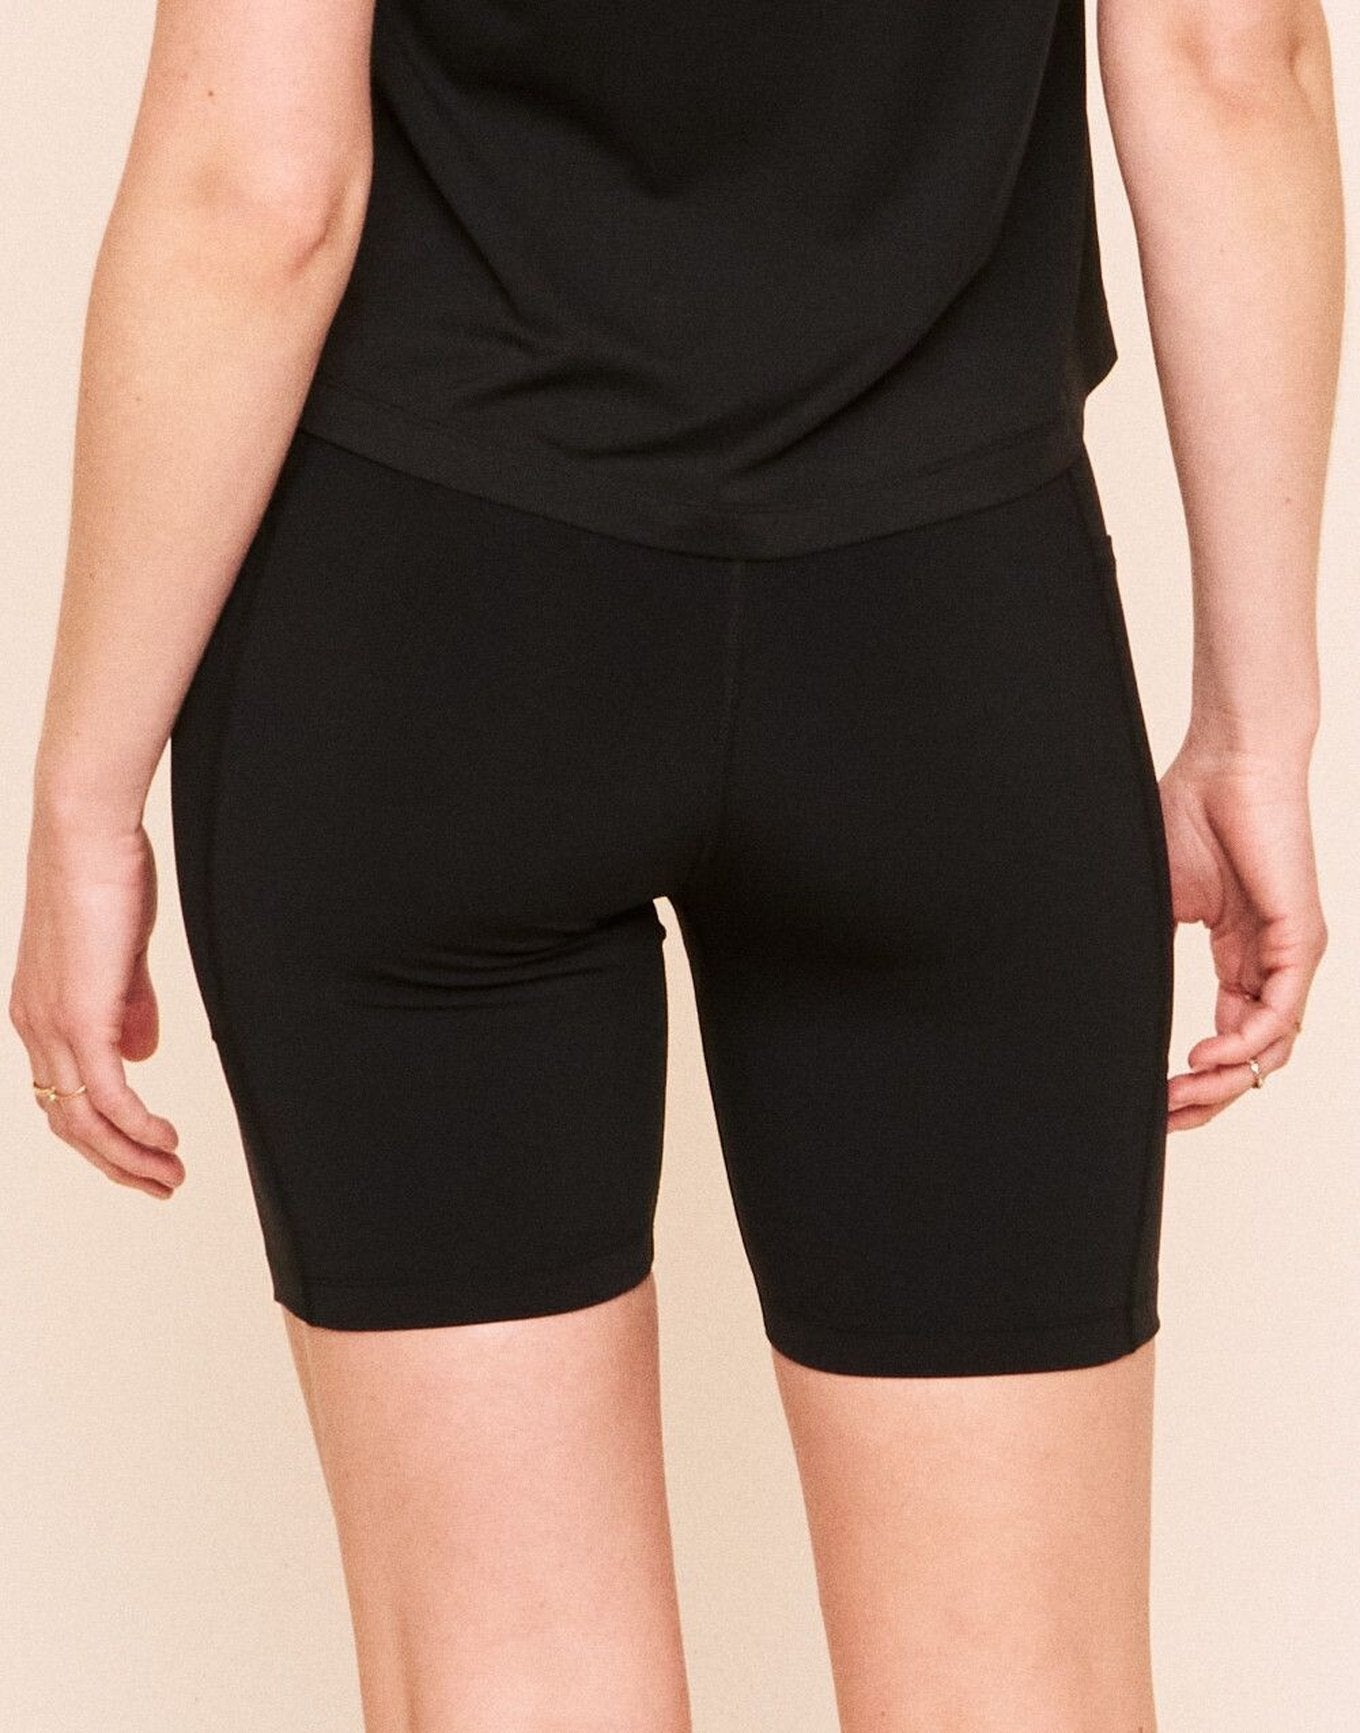 Earth Republic Anais High Waisted Short Biker Shorts in color Jet Black and shape short